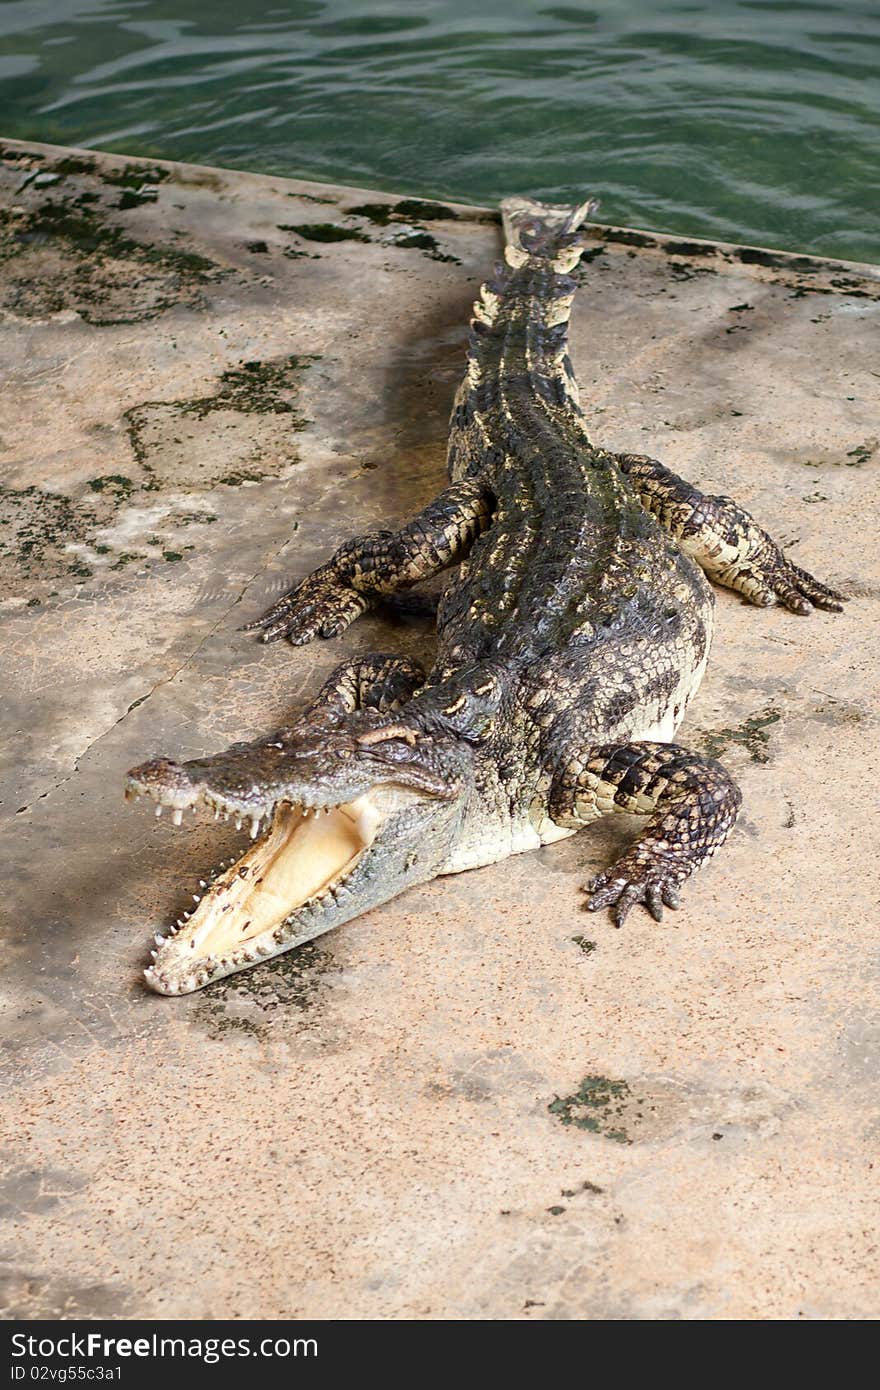 Show crocodiles in the zoo. , An animal that is dangerous. And non-cultivable